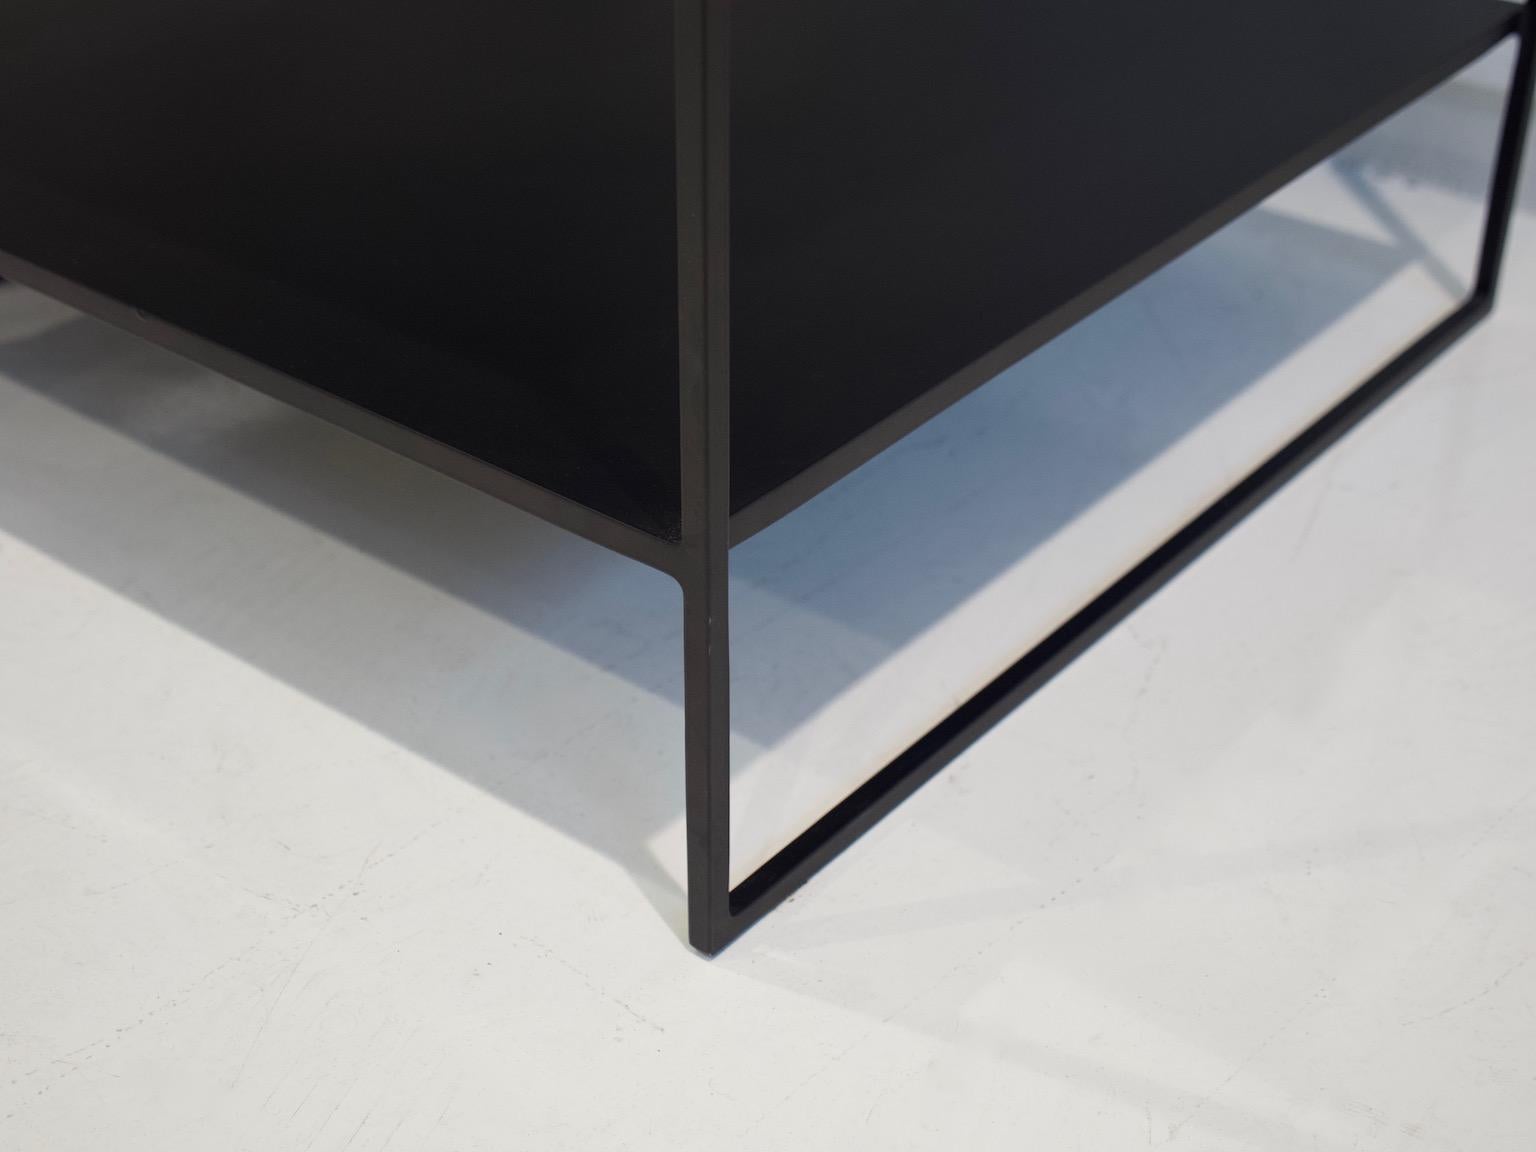 Pair of Black Console Tables by Rodolfo Dordoni for Minotti 1